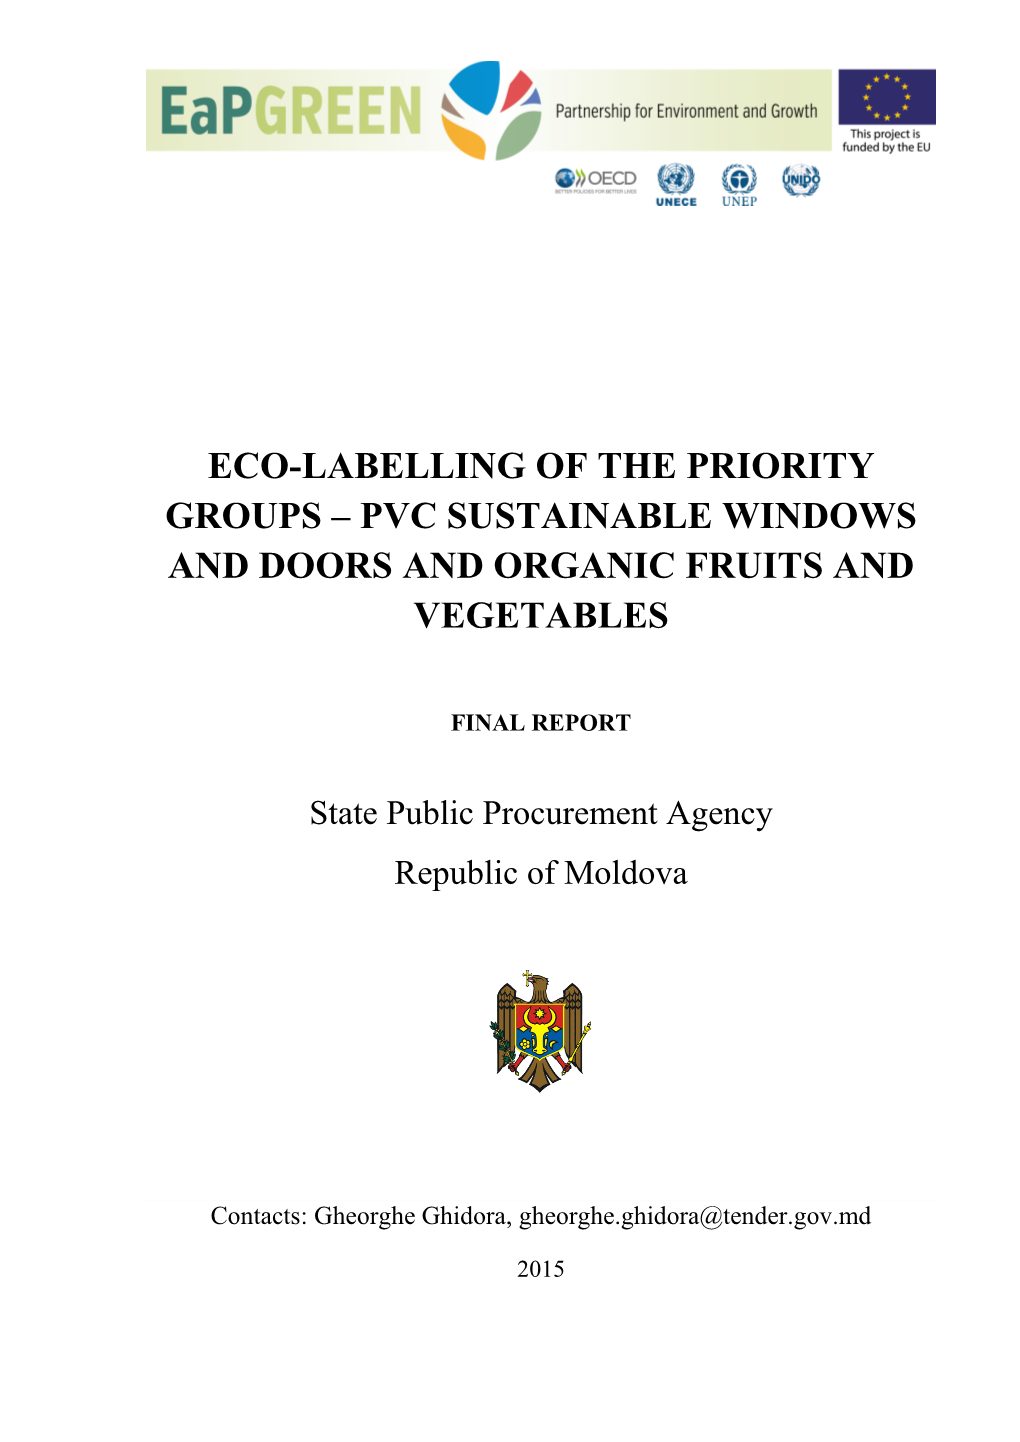 Eco-Labelling of the Priority Groups – Pvc Sustainable Windows and Doors and Organic Fruits and Vegetables